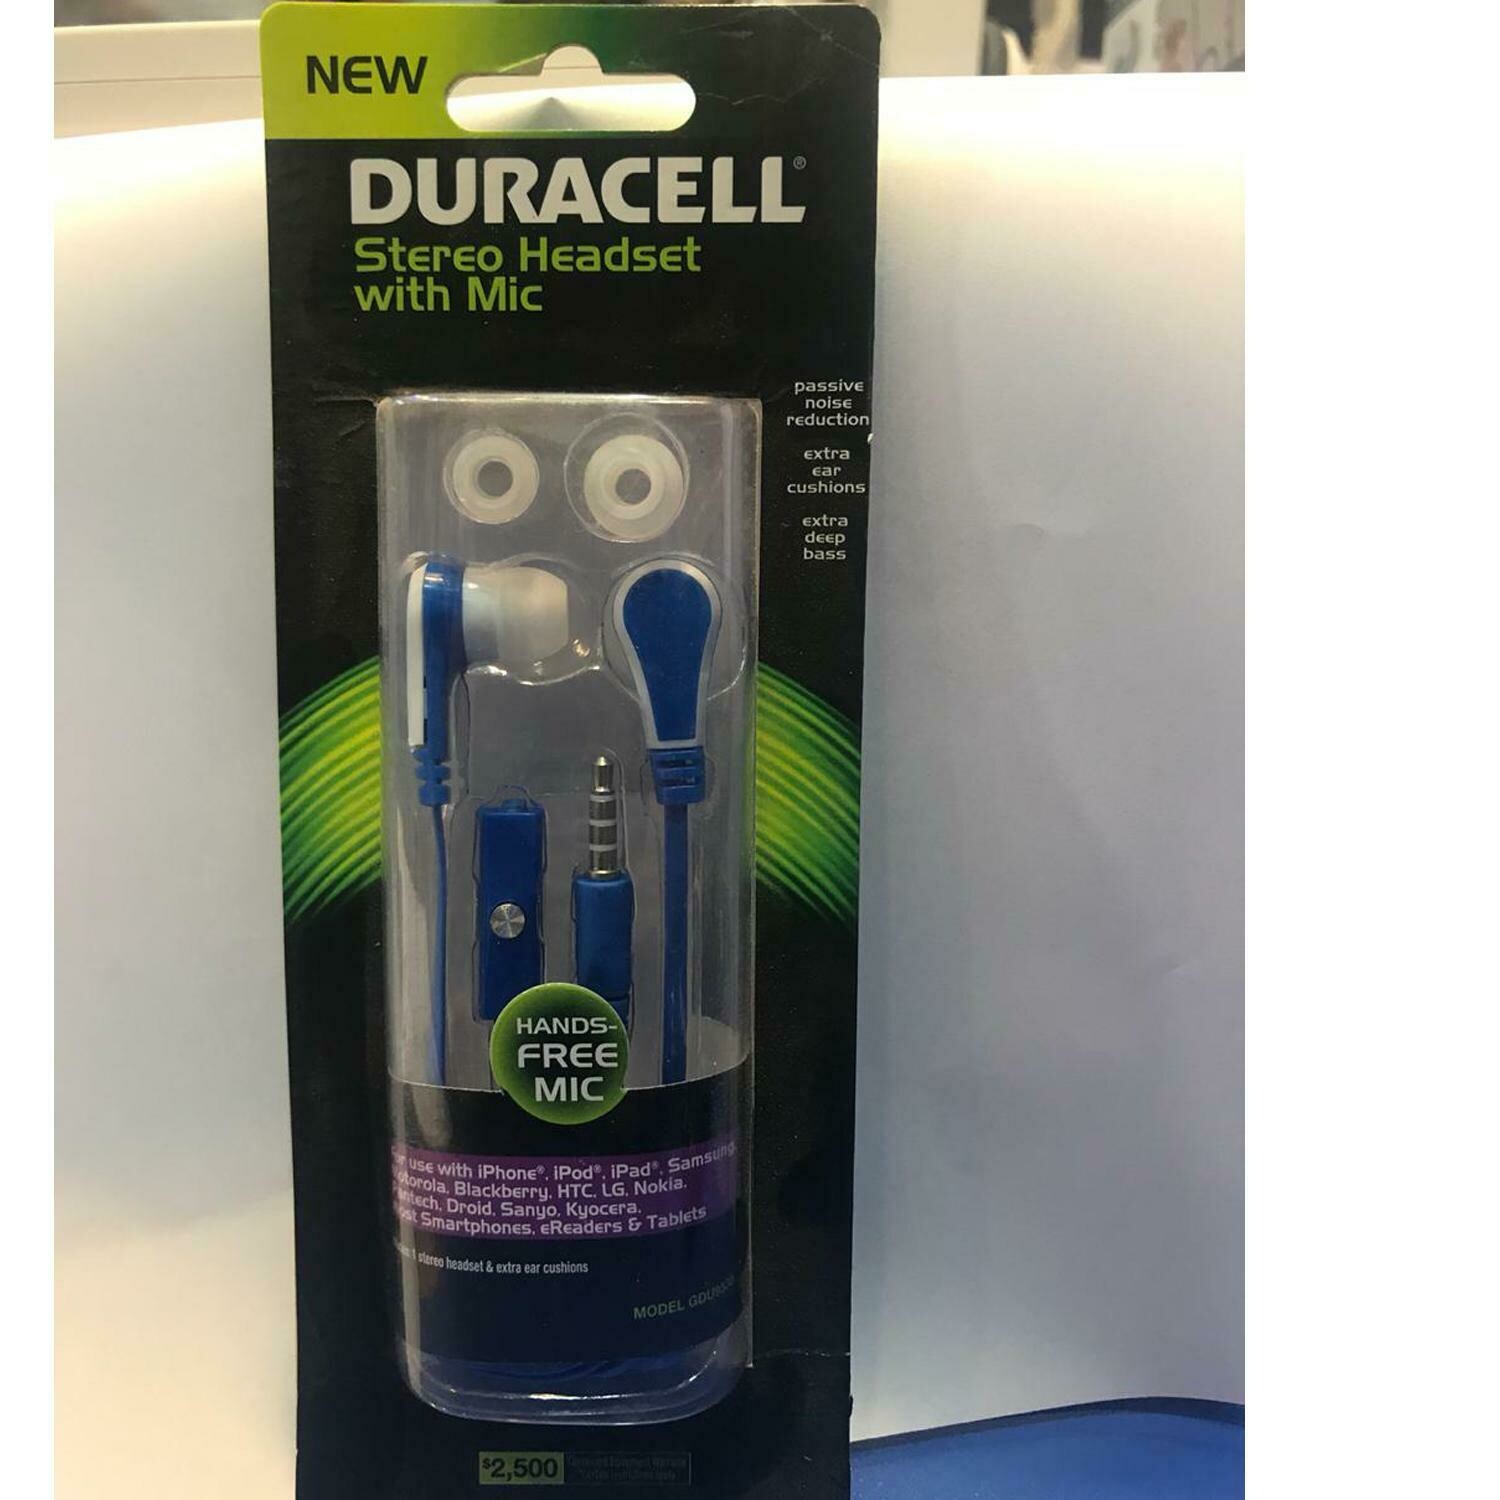 Duracell Stereo Headset